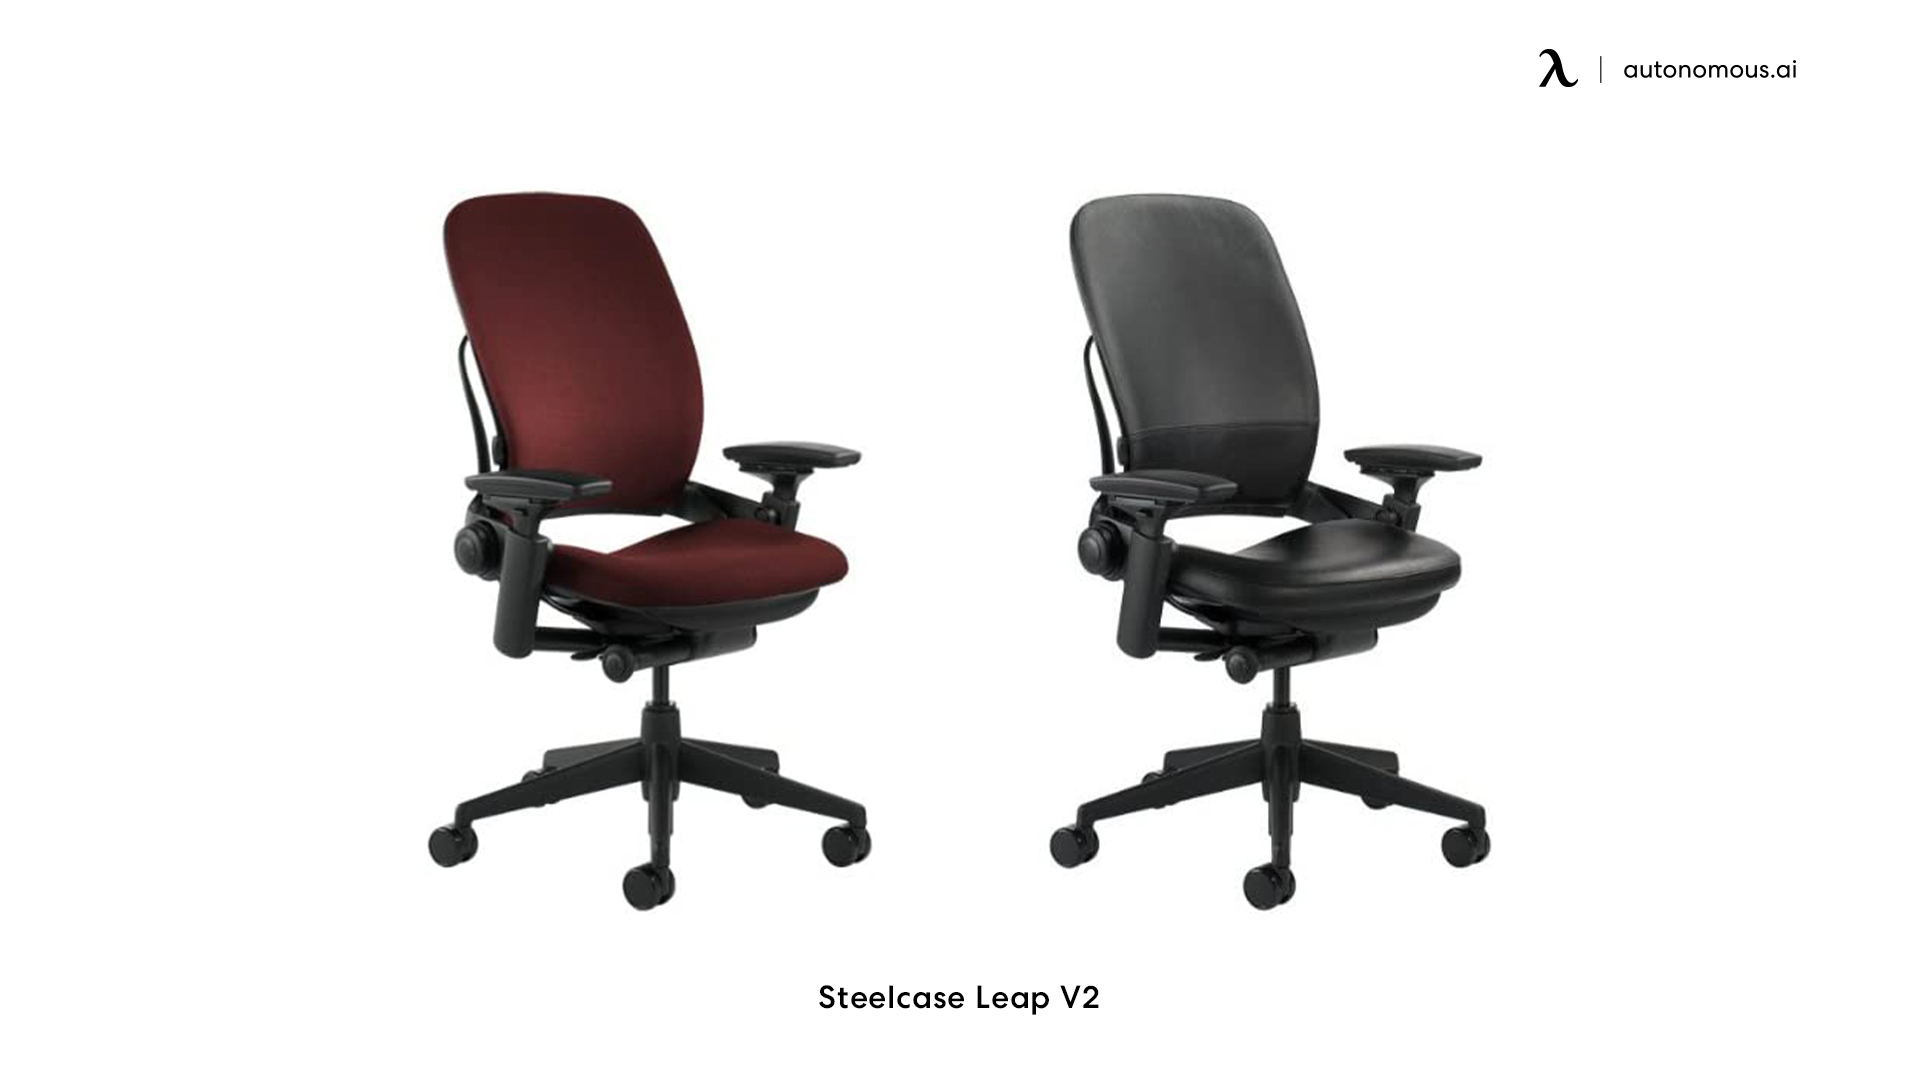 Steelcase Leap V2 small home office chair